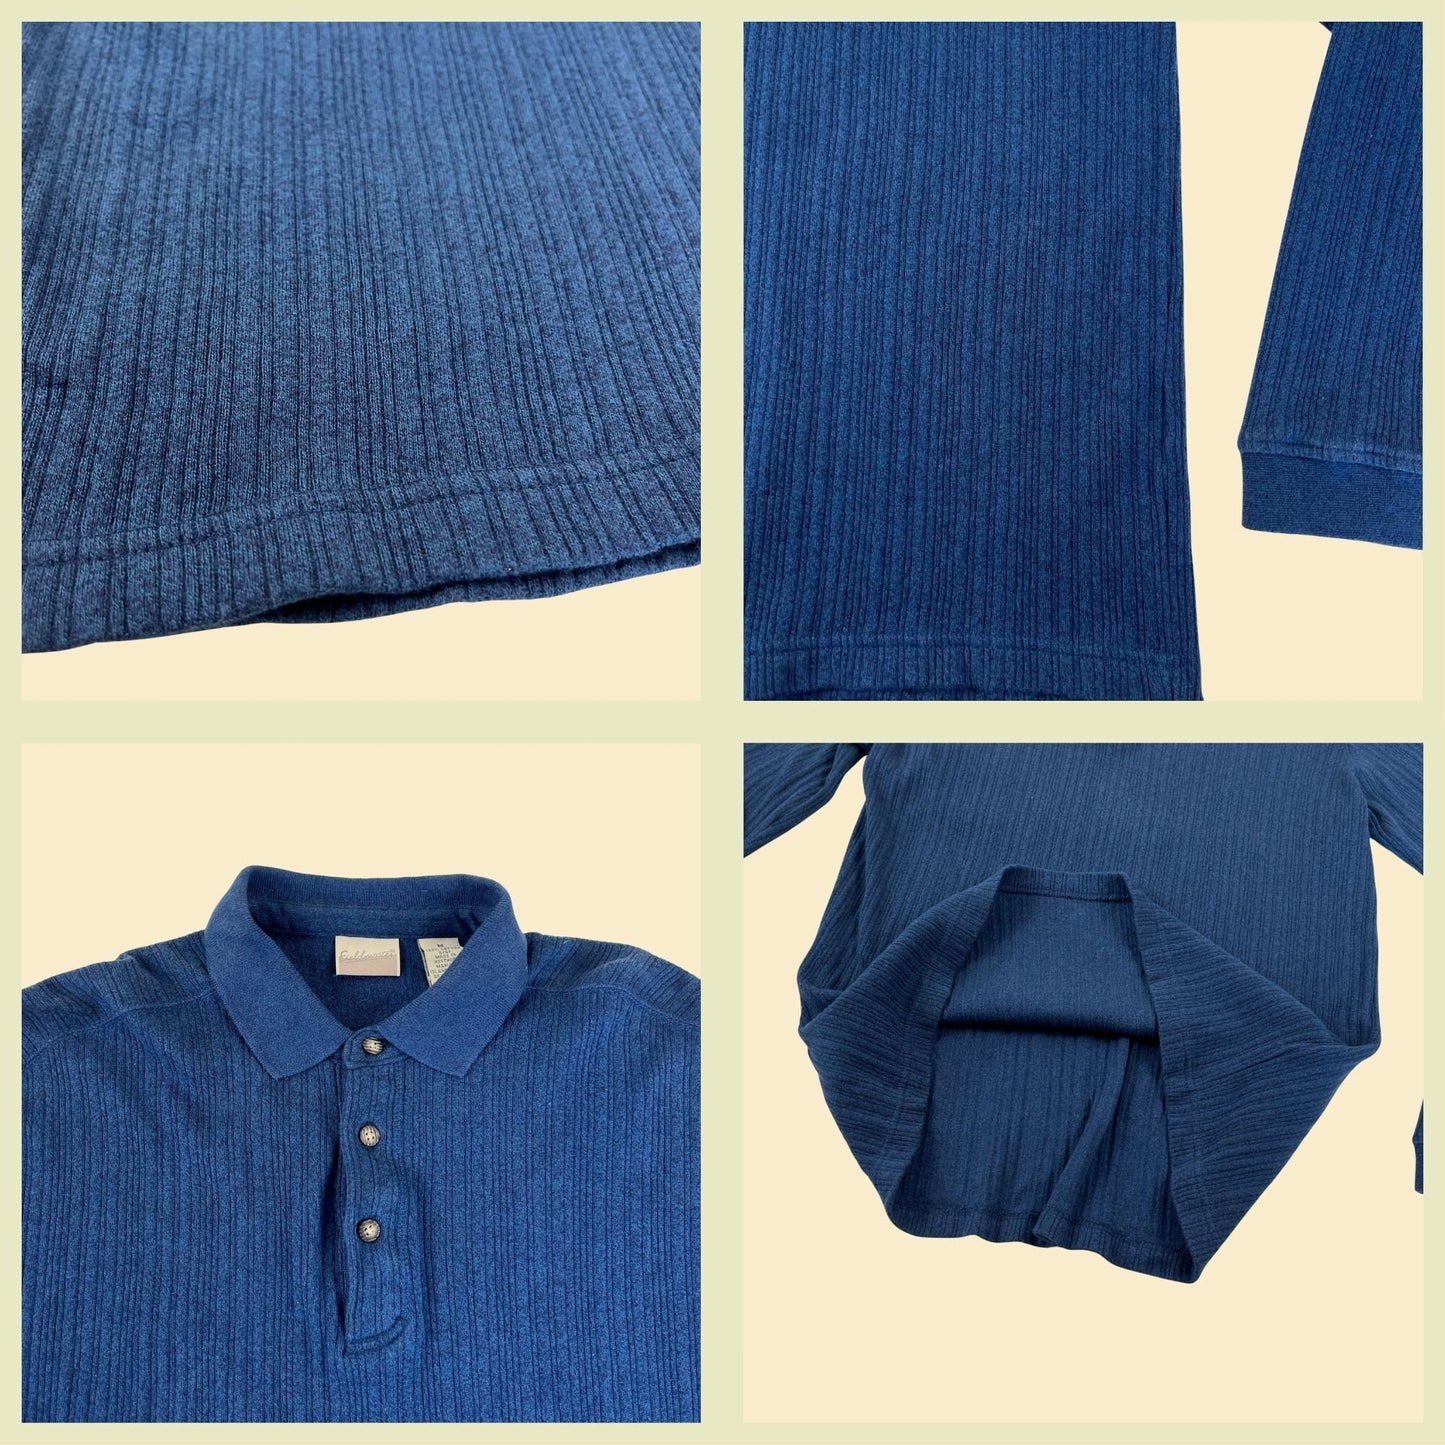 90s long sleeve blue polo shirt by Fieldmaster, vintage size M 1990s ribbed collared shirt